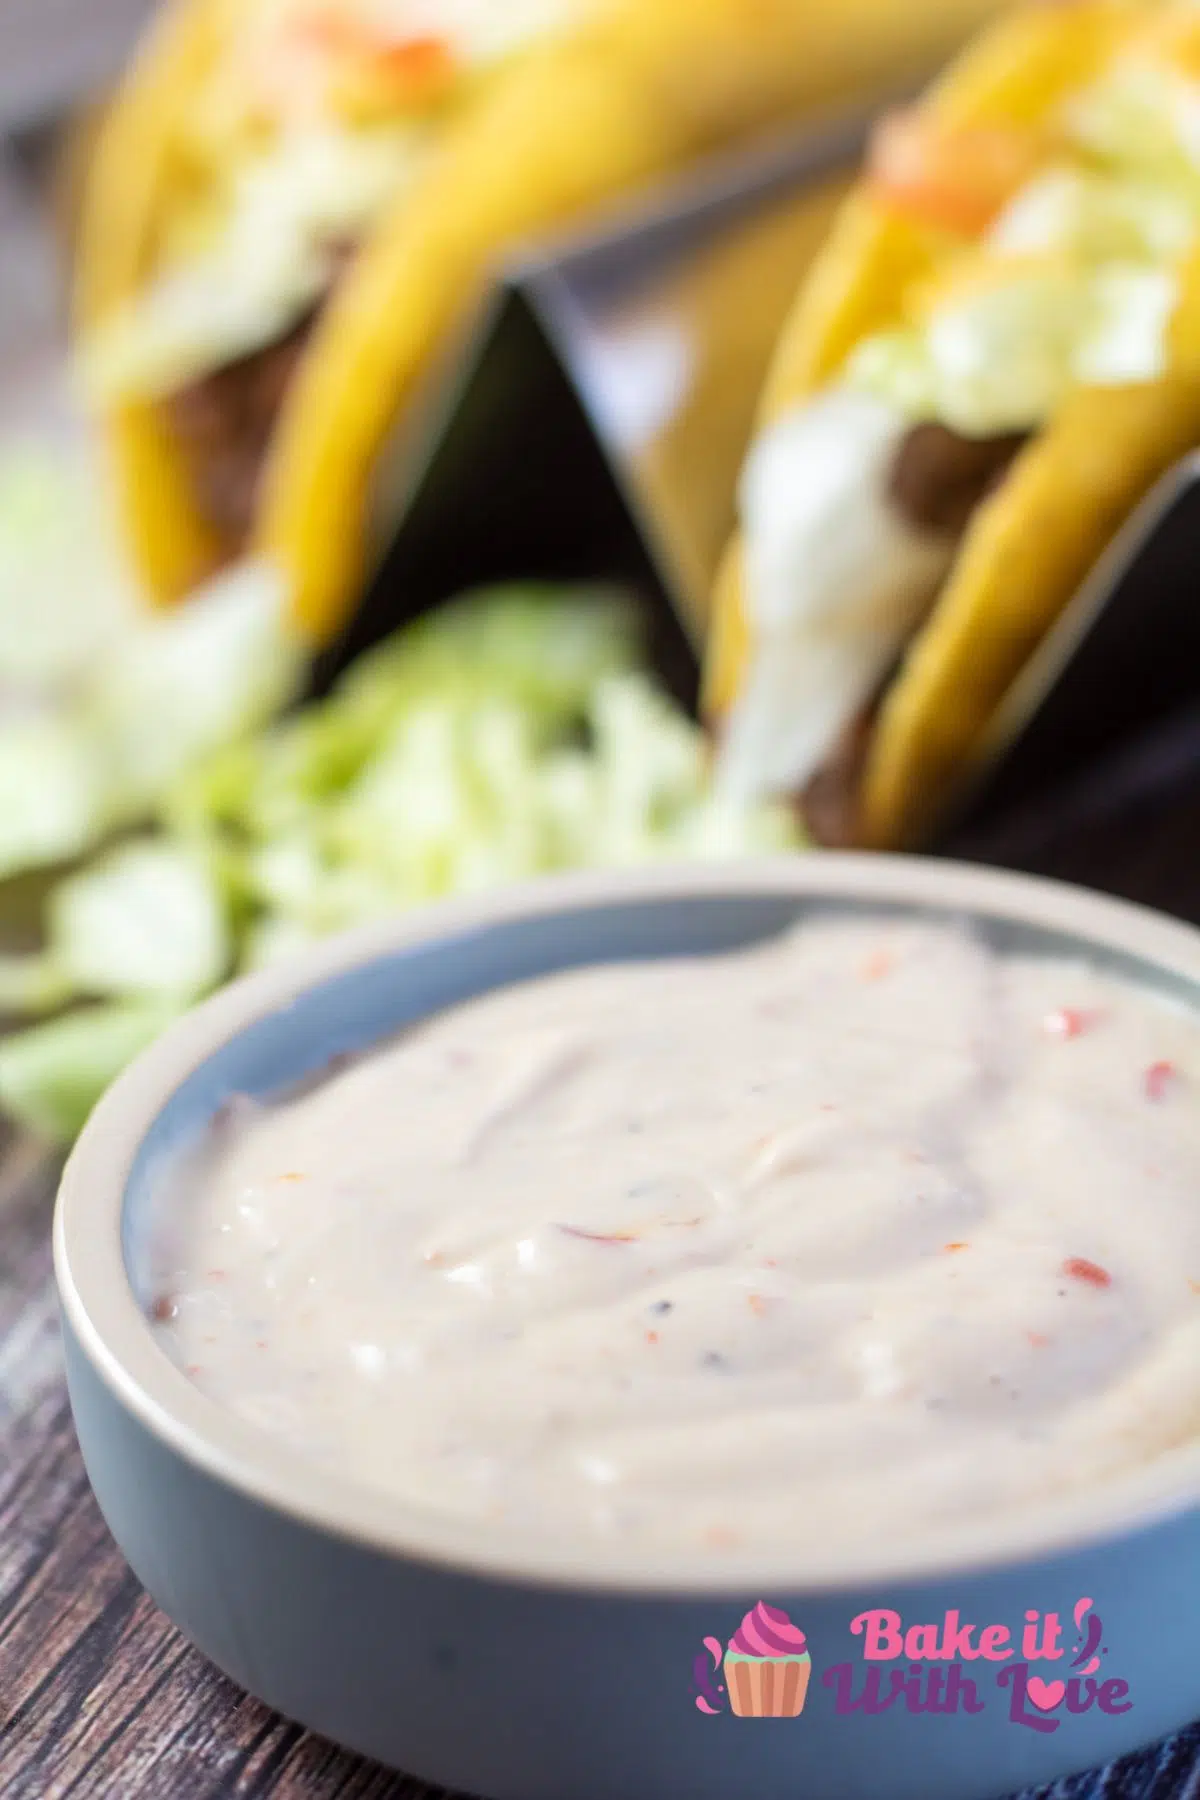 Tall image showing tacos and Taco Bell creamy Baja sauce.